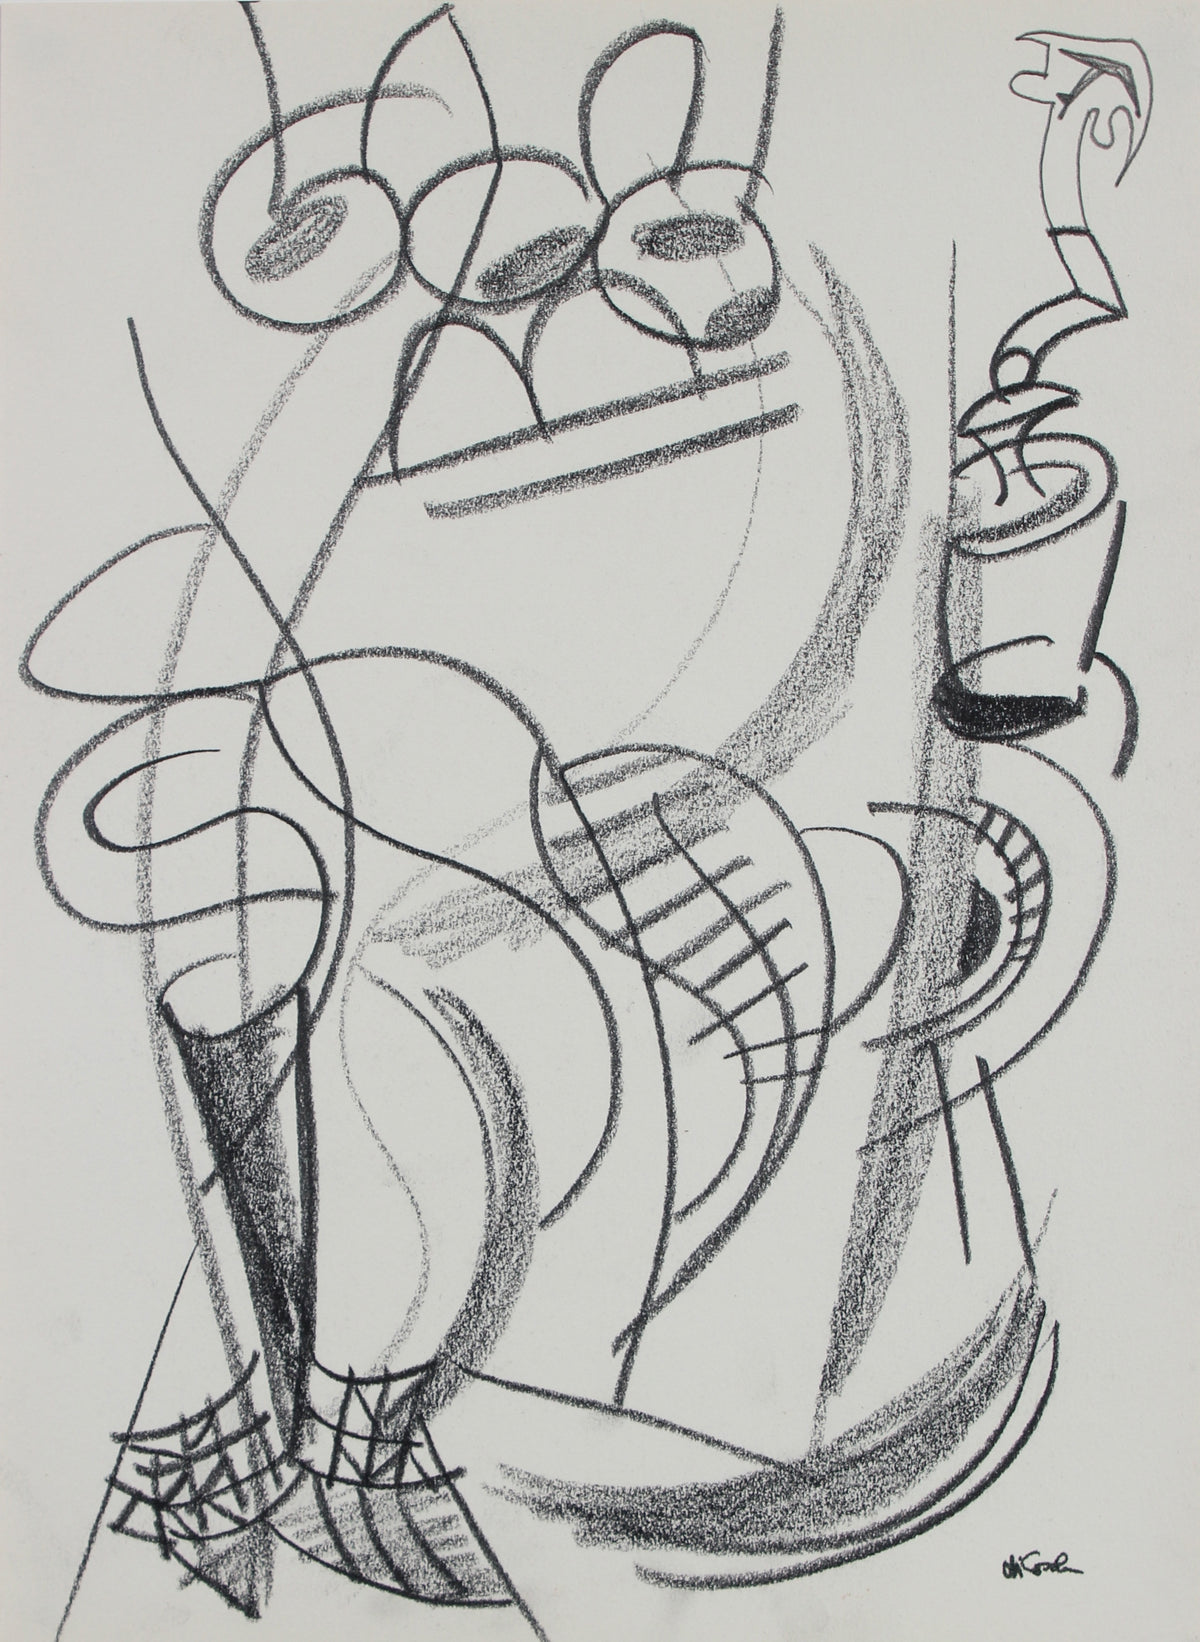 Monochromatic Deconstructed Sketch with Shading &lt;br&gt; Late 20th Century Graphite &lt;br&gt;&lt;br&gt;#98841